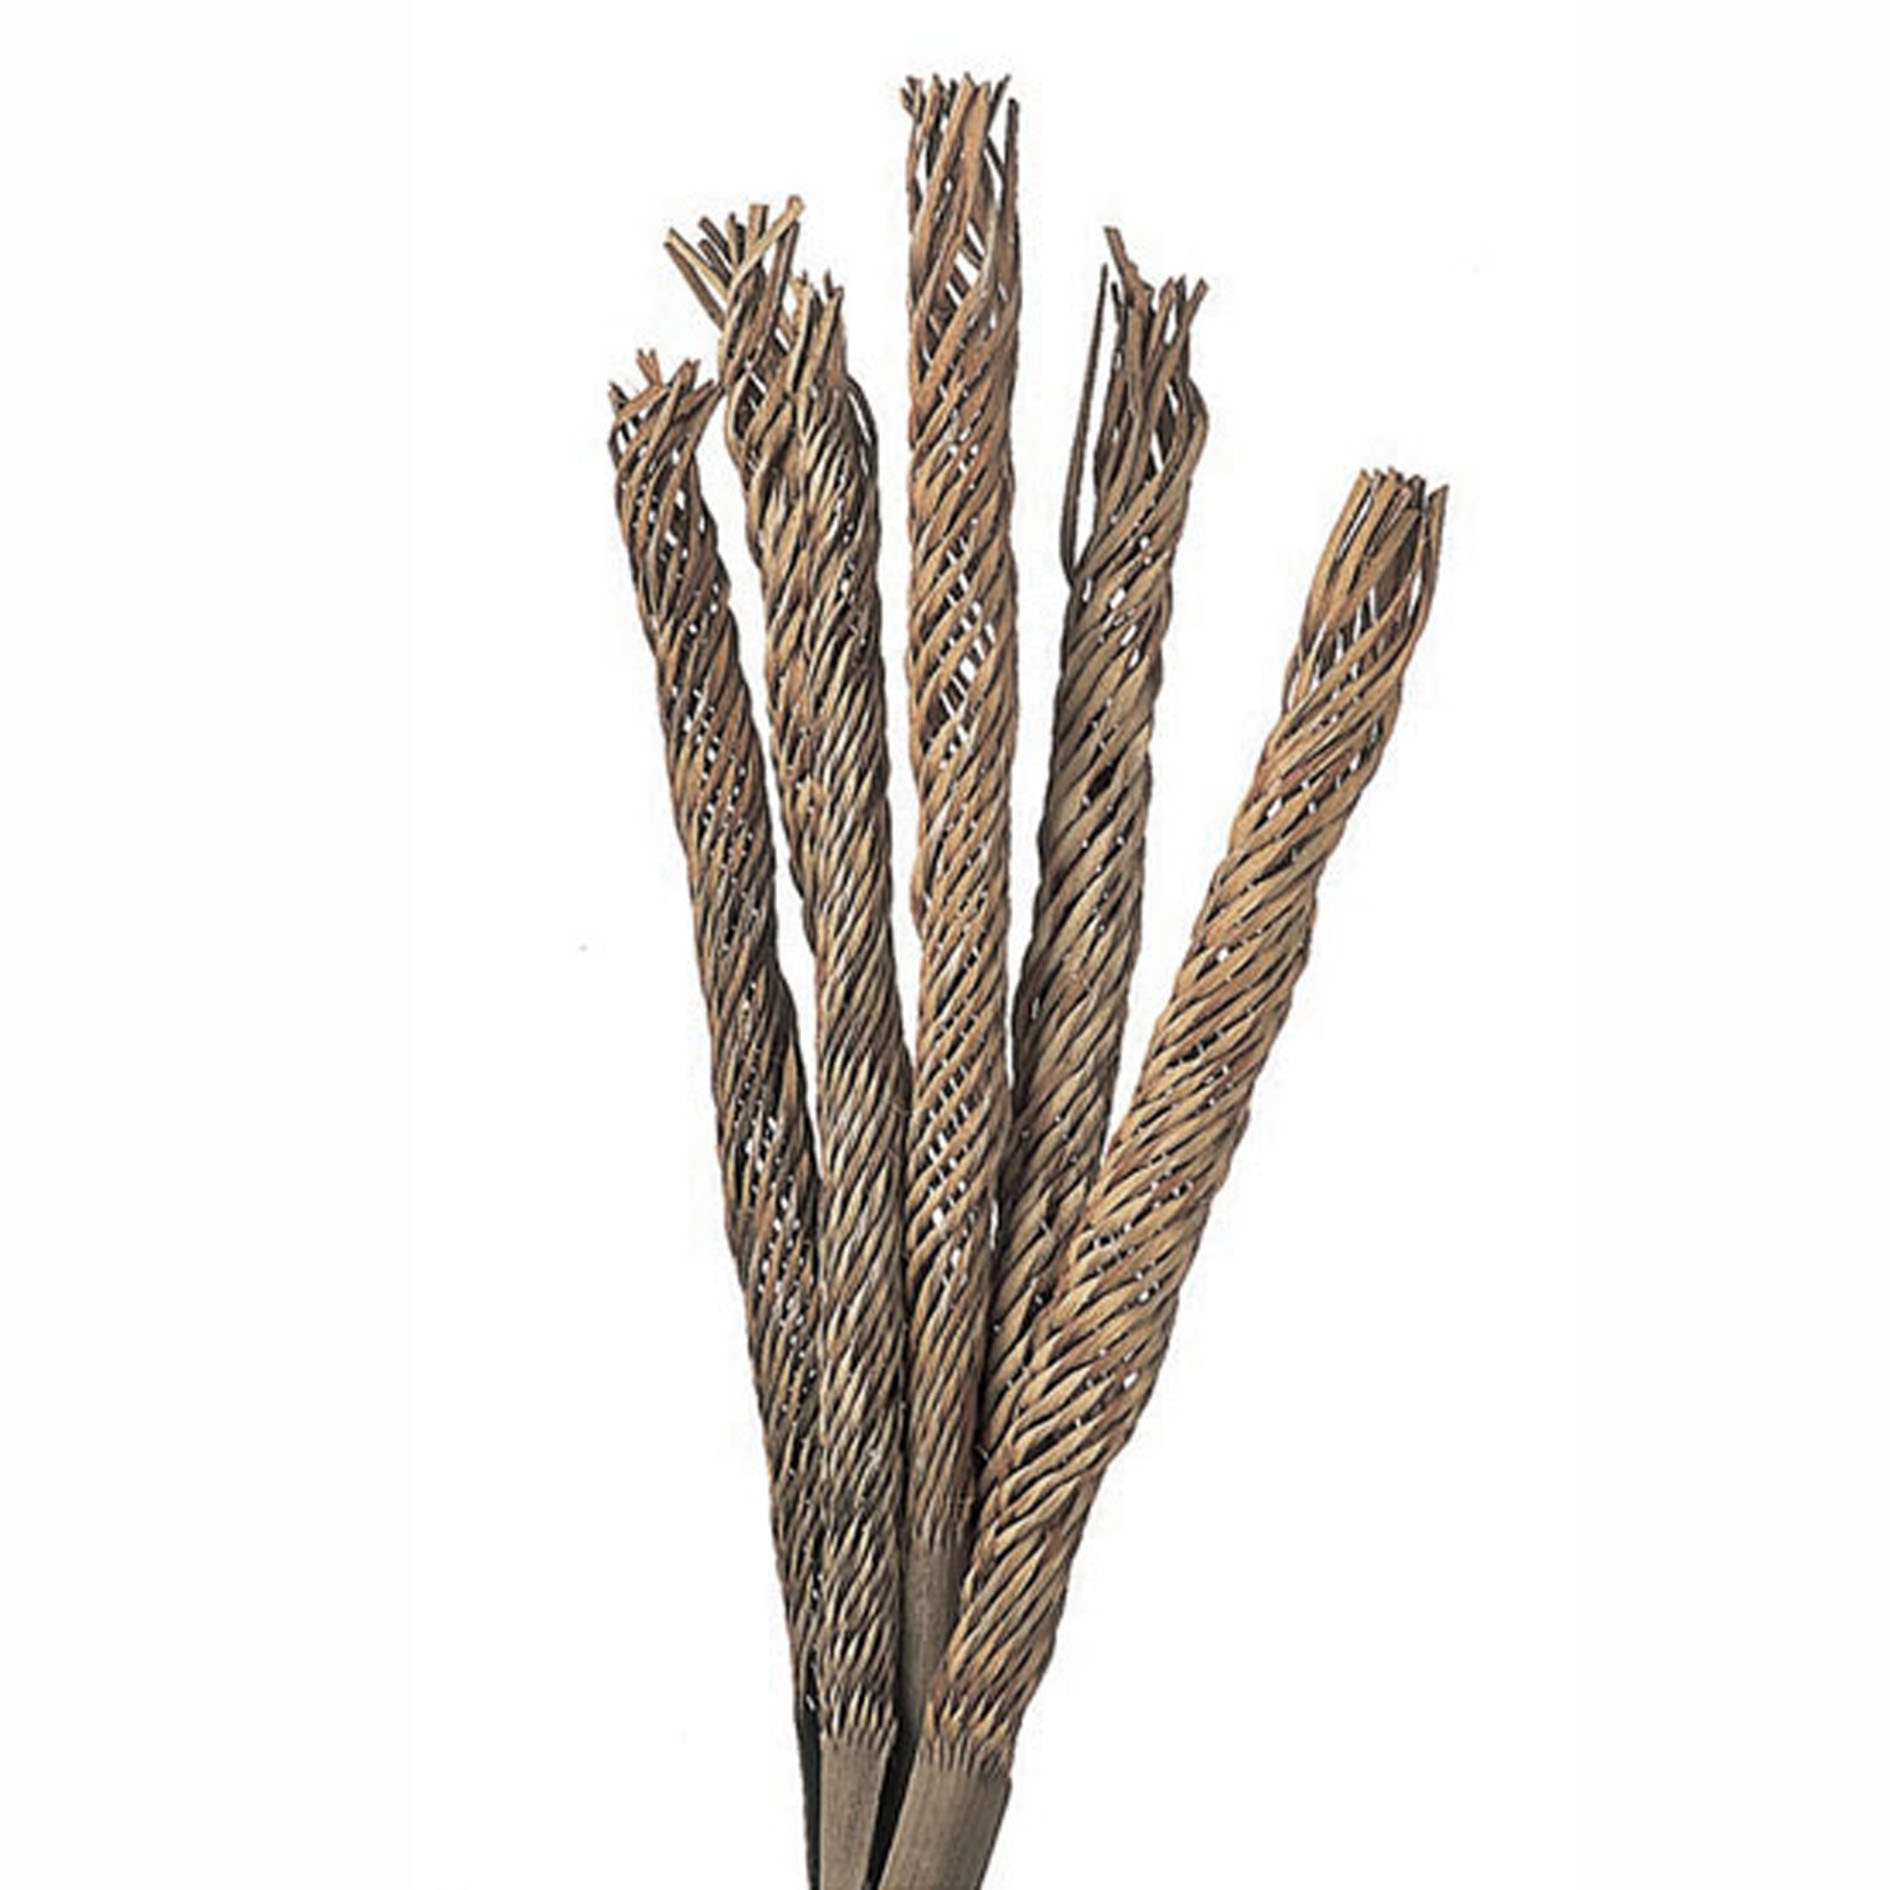 NATURAL PRODUCTS DRIED FLOWERS AND ERBS,COCO ROLL 6 PZ 55 CM NAT.